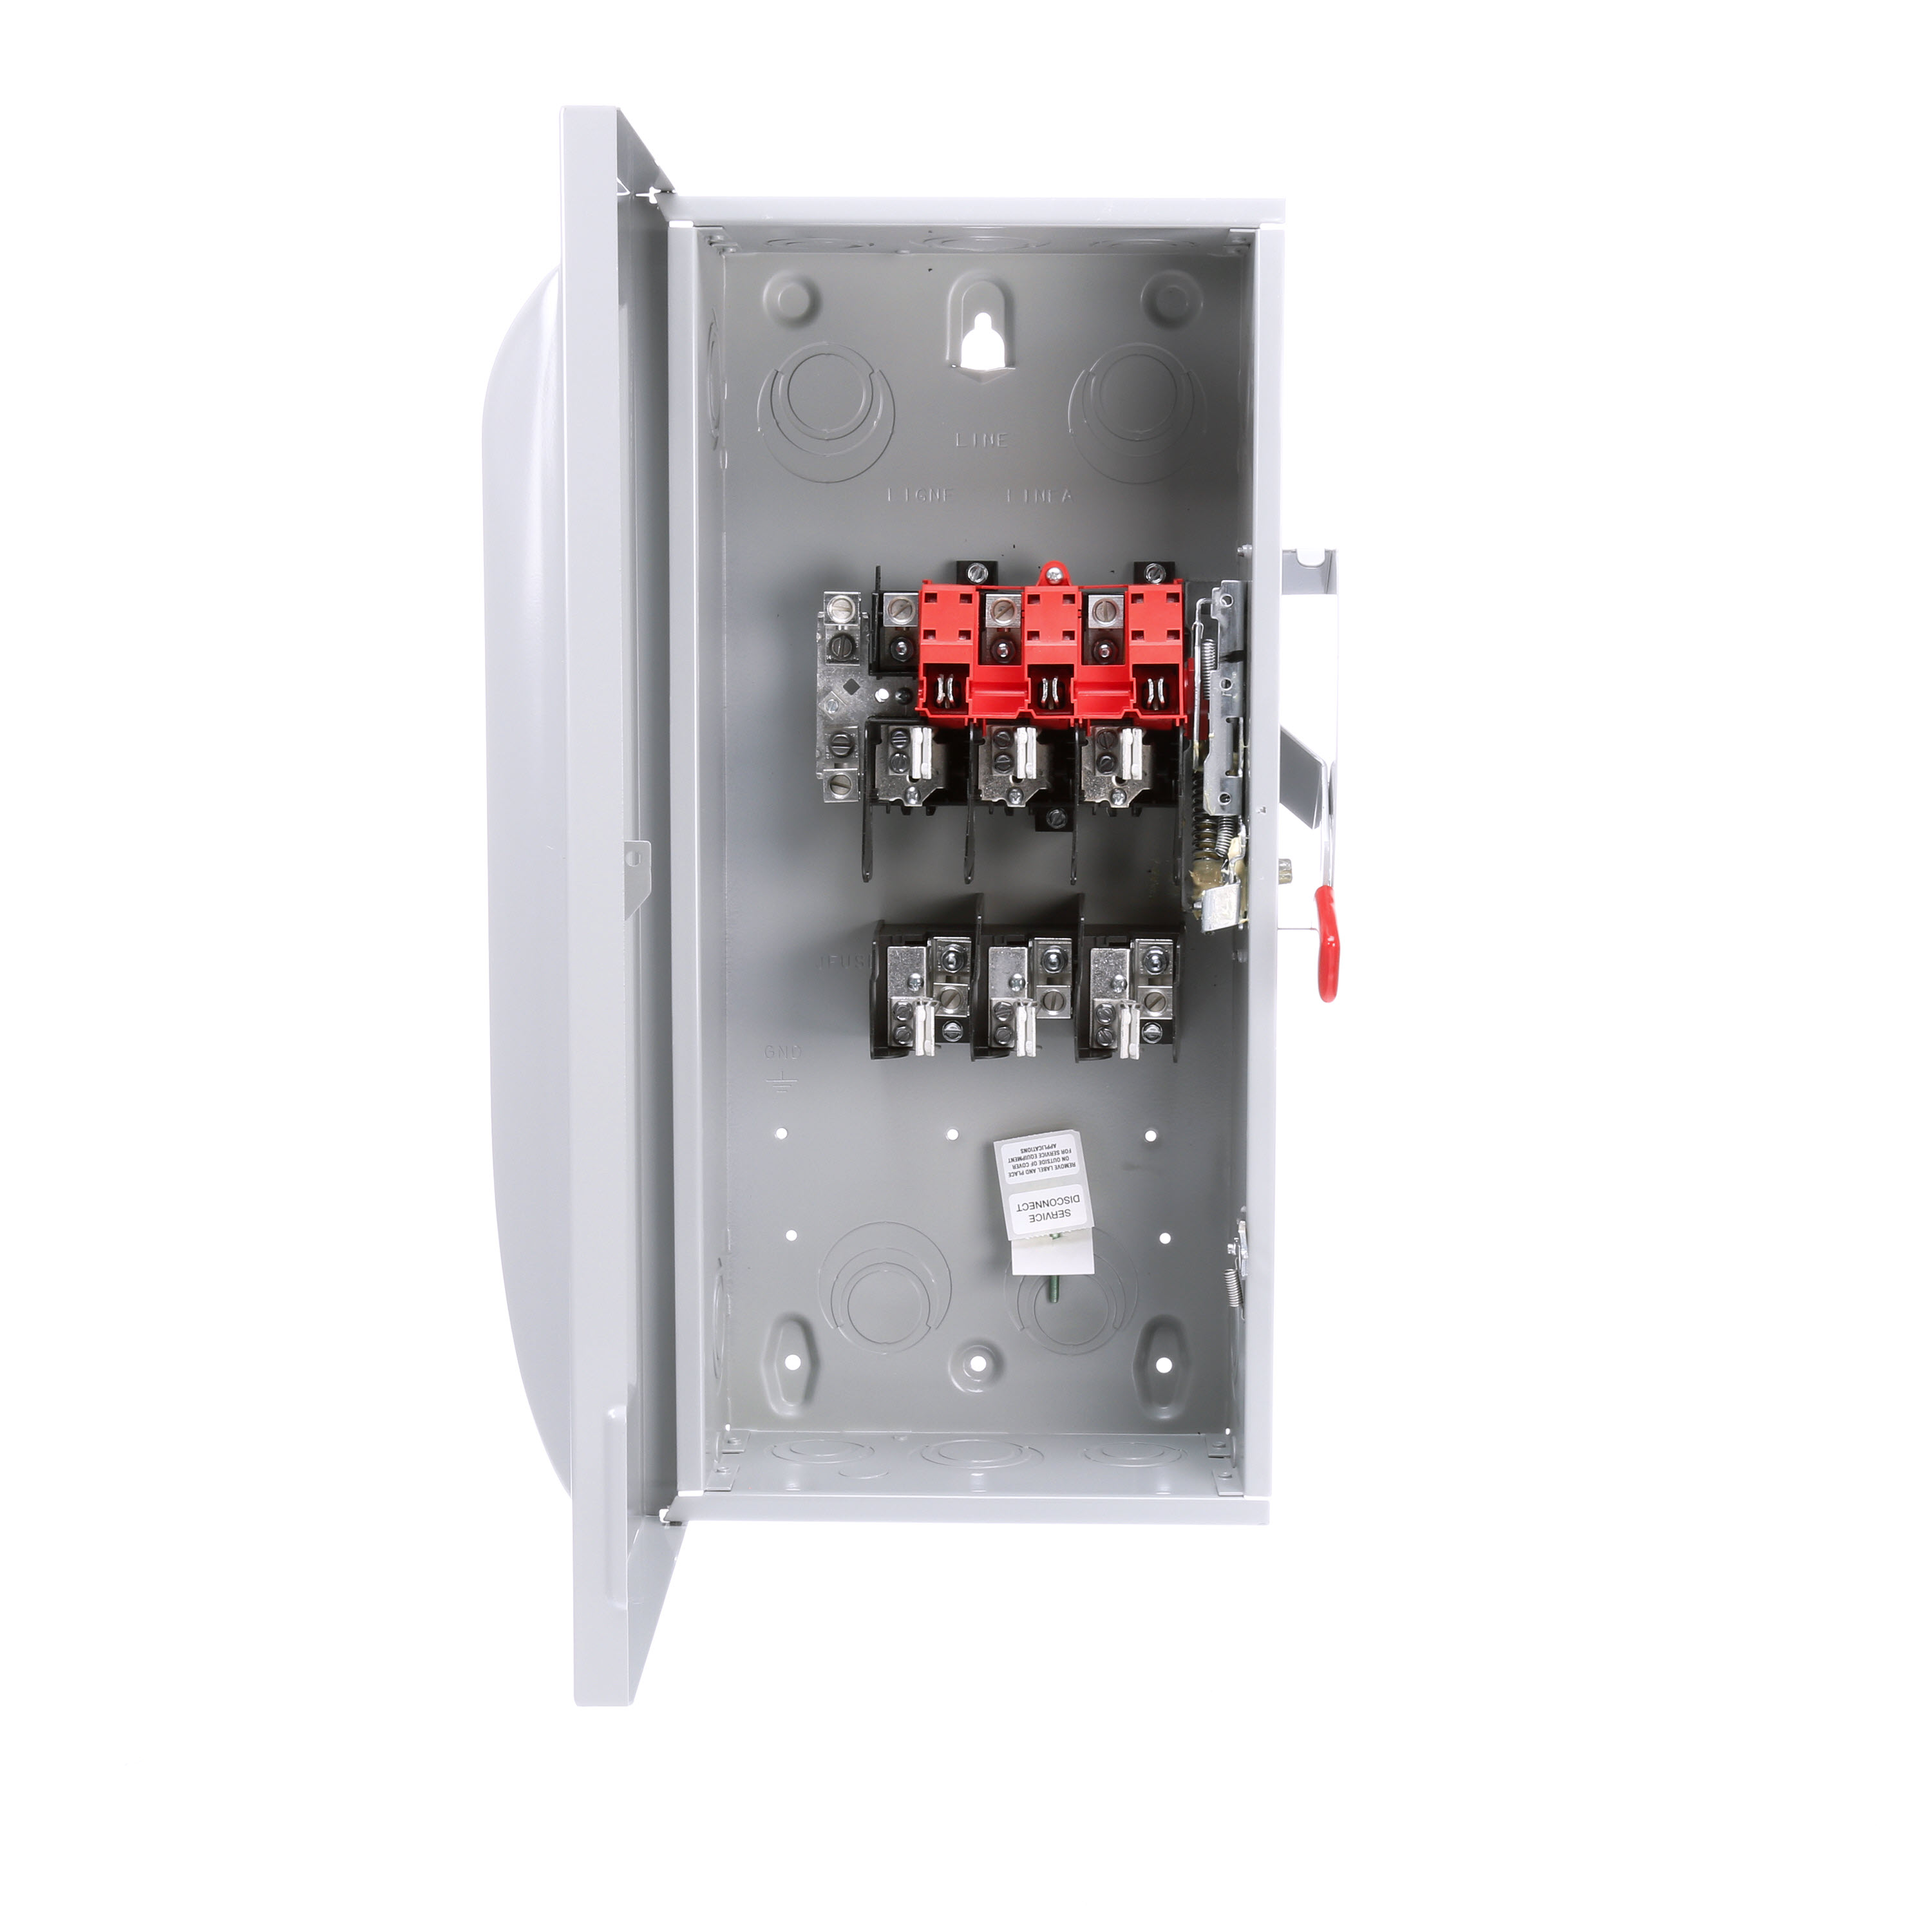 Siemens Low Voltage Circuit Protection General Duty Safety Switch. 3-Pole 3-Fuse and solid neutral Fused in a type 1 enclosure (indoor). Rated 240VAC (100A). Horse power (Std, Time delay) fused 1-PH 2-W (7-1/2, 15), 3-PH 3-W (15, 30), 250VDC (20). Special features service entrance labeled .